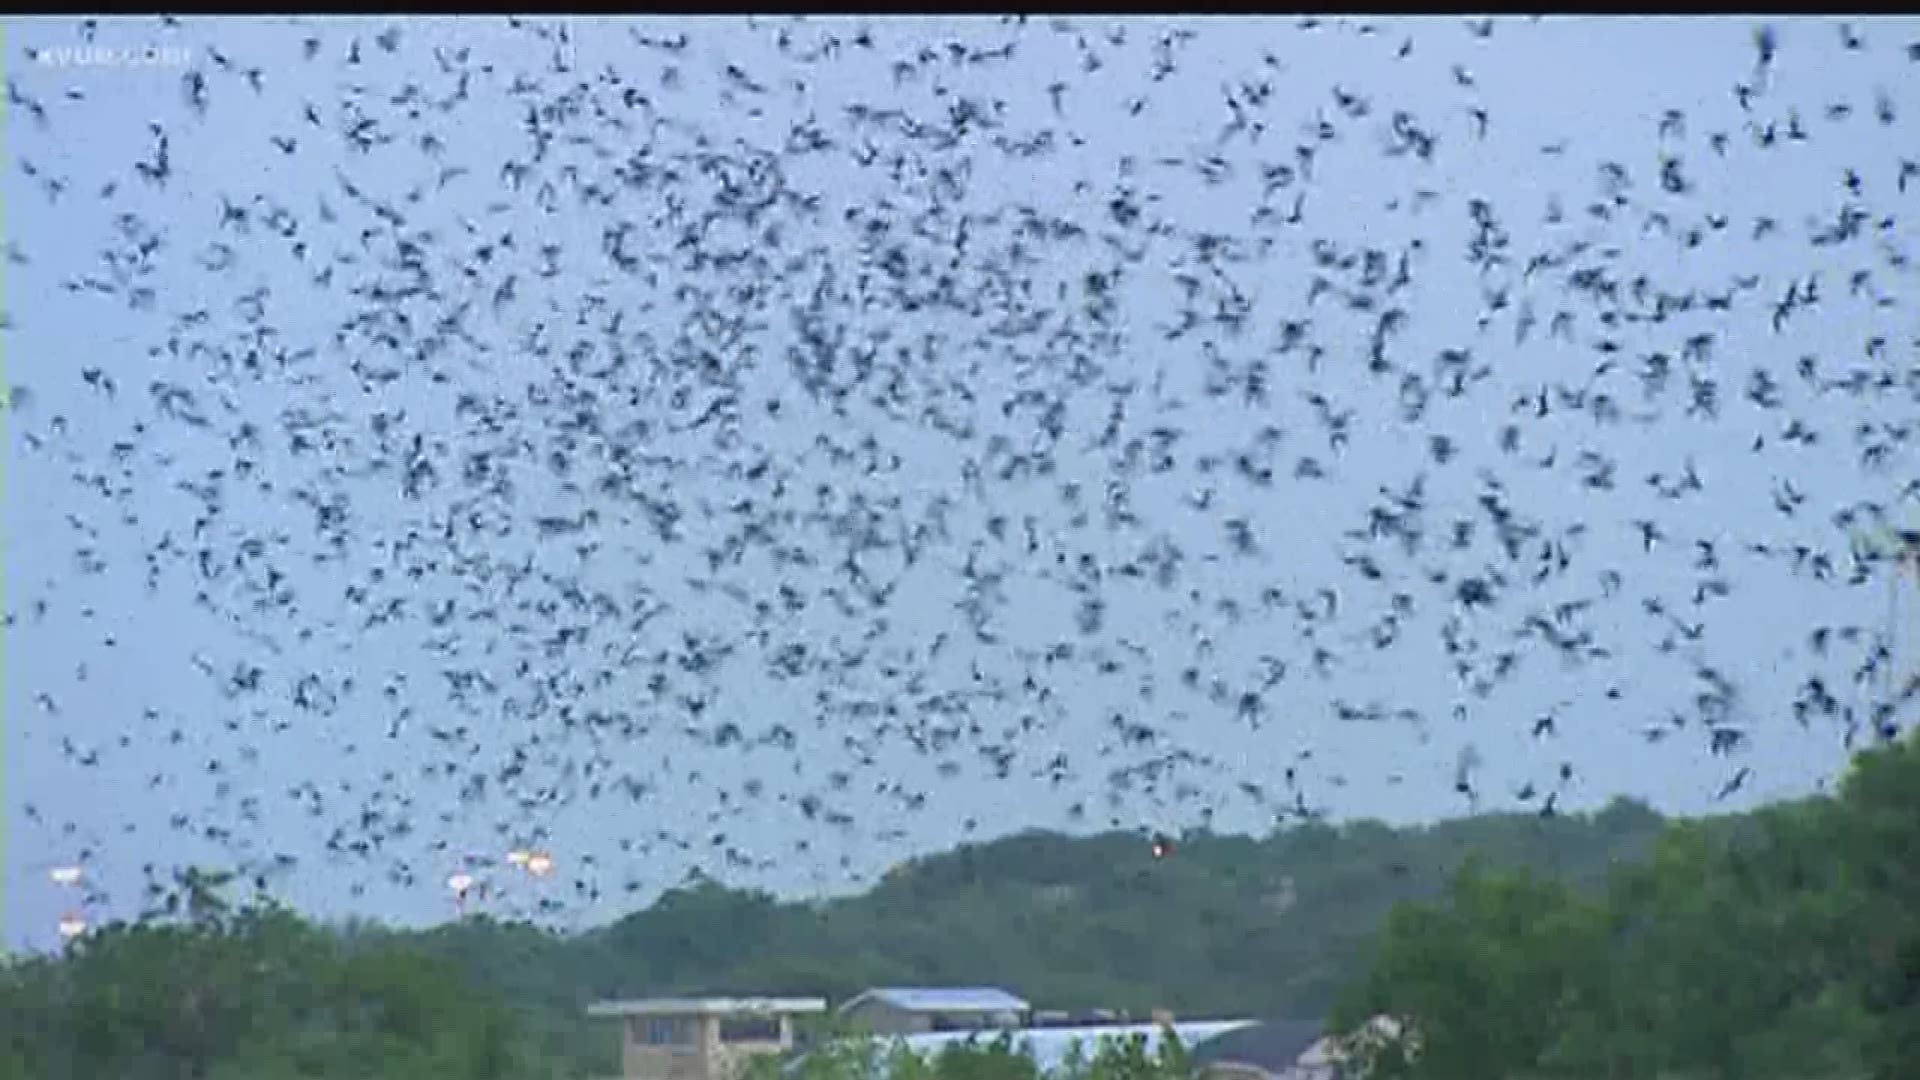 In the past three to five years, thousands of bats have been extending their stay in Central Texas through November and beyond.